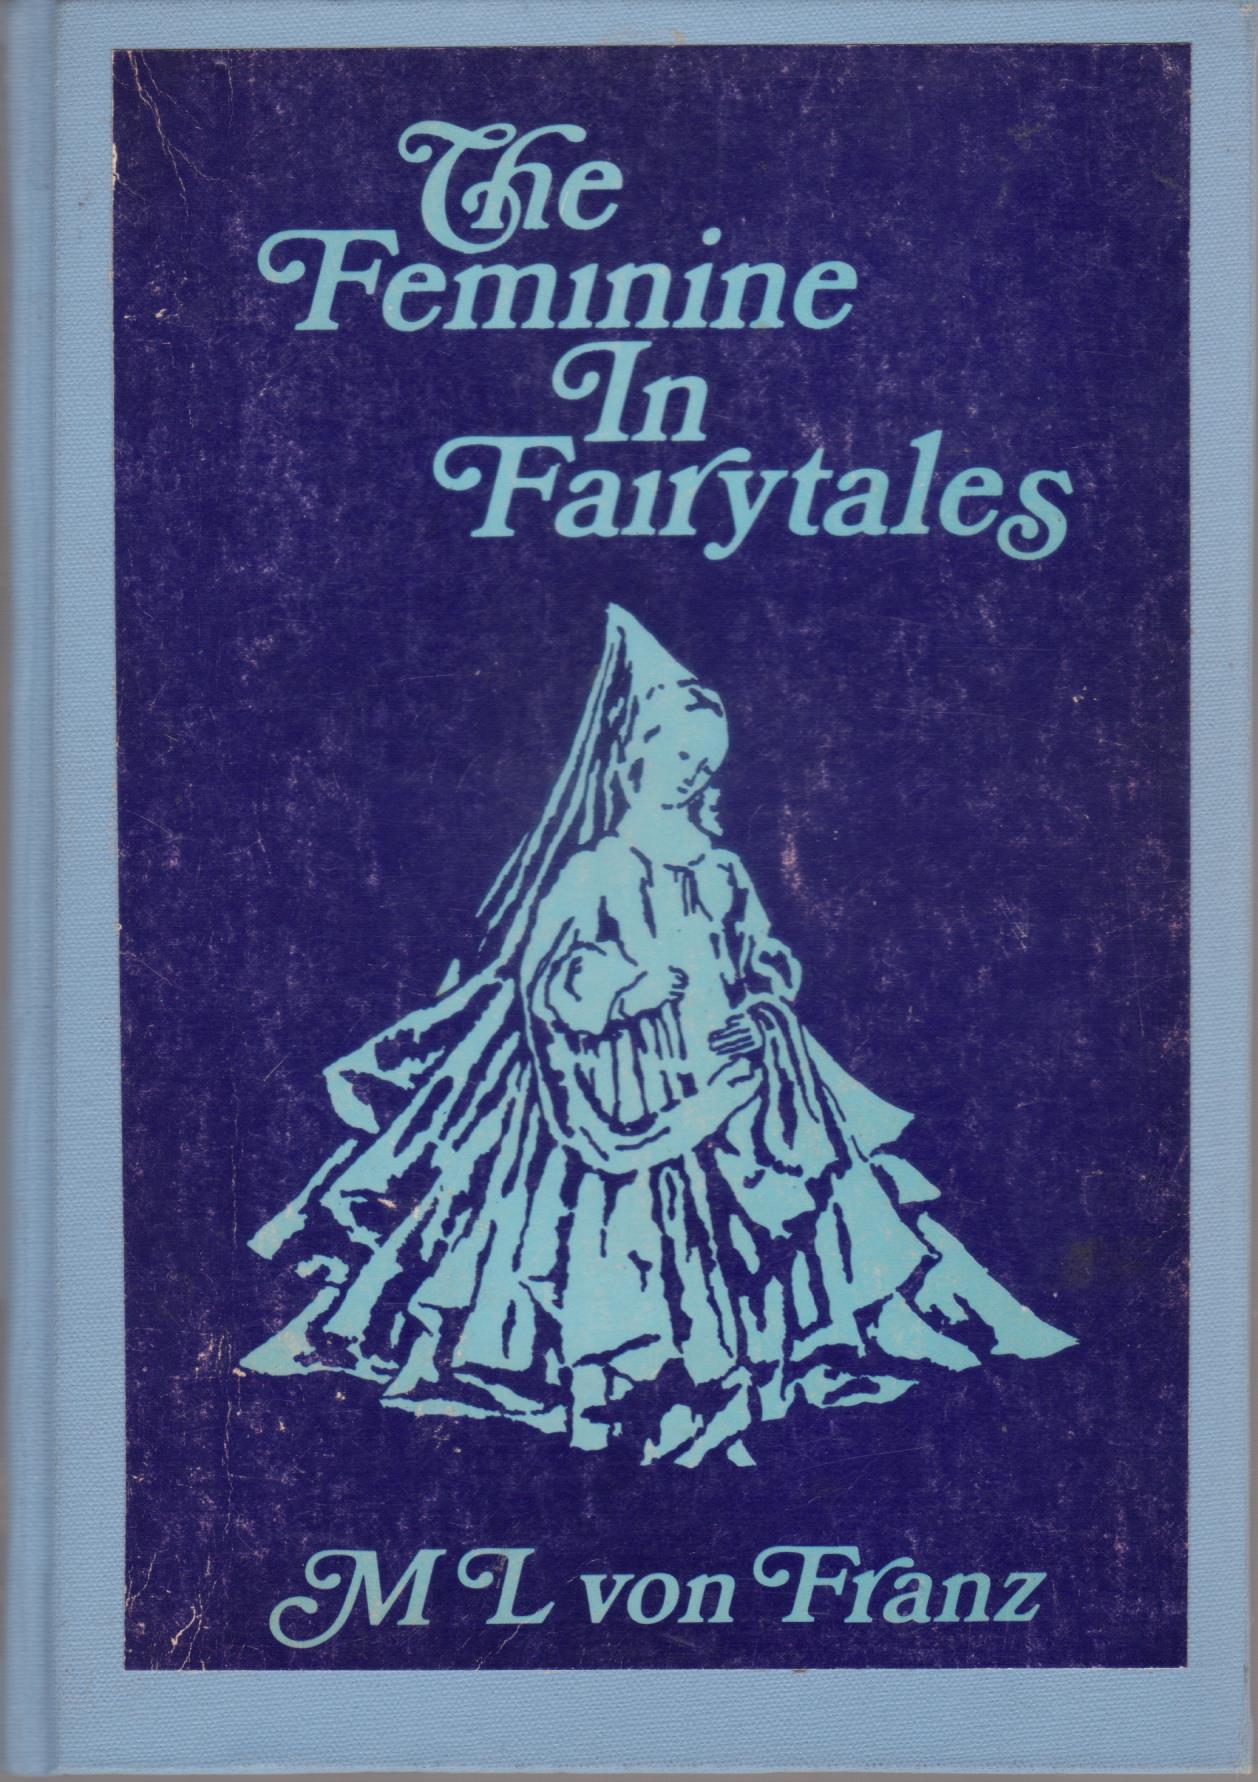 cover image of Problems of The Feminine in Fairytales, for sale in New Zealand 